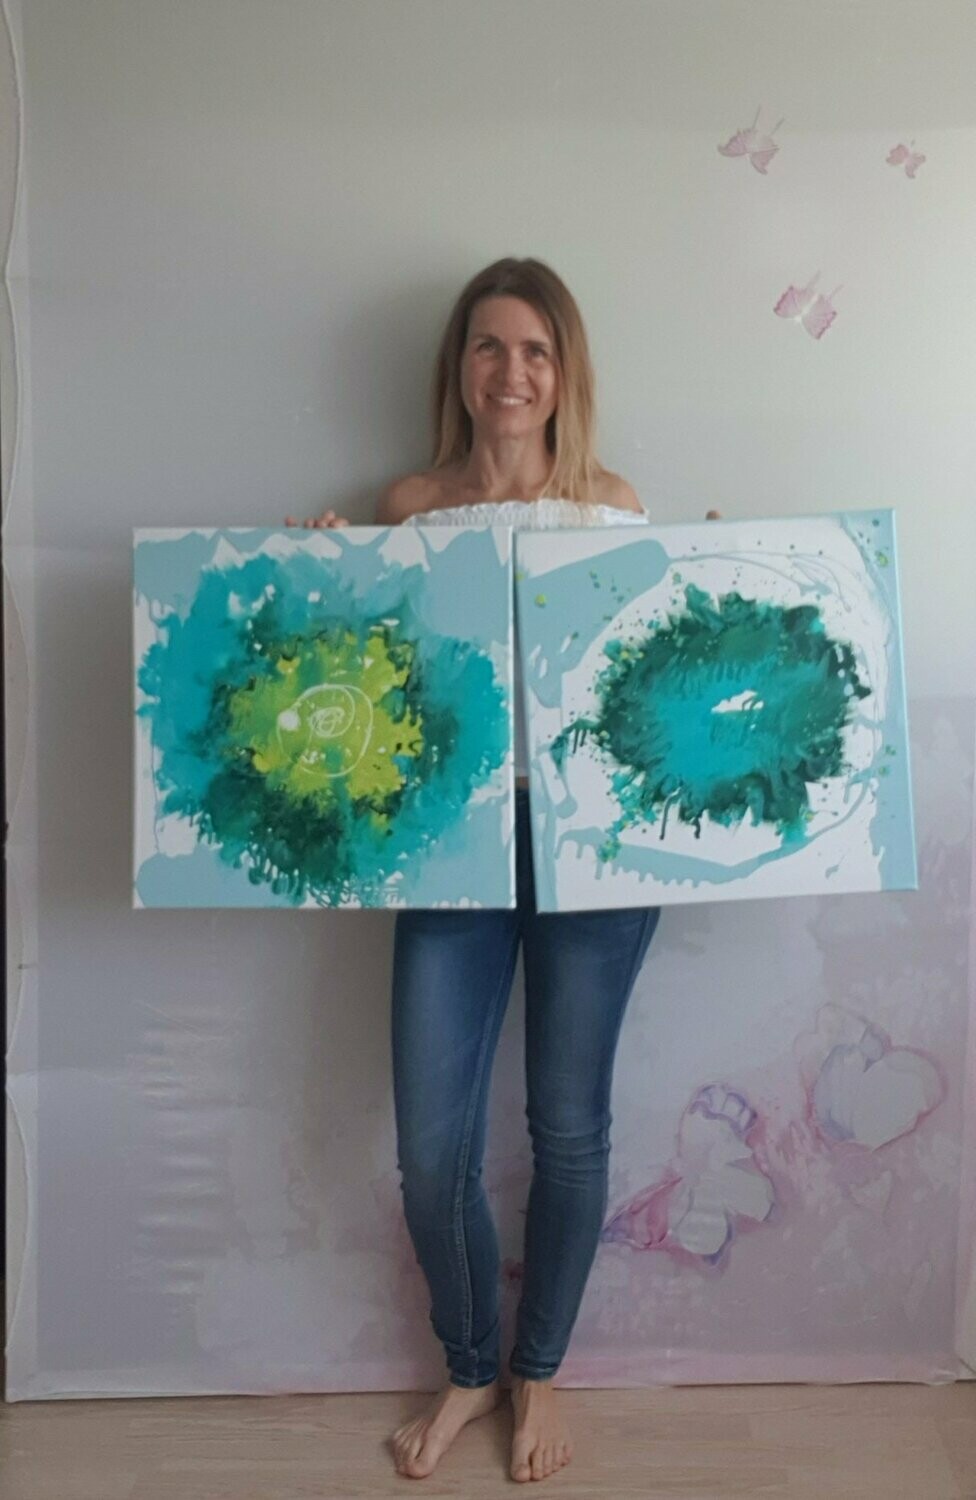 Azure Twins (2 paintings). Mixed Media on Canvas